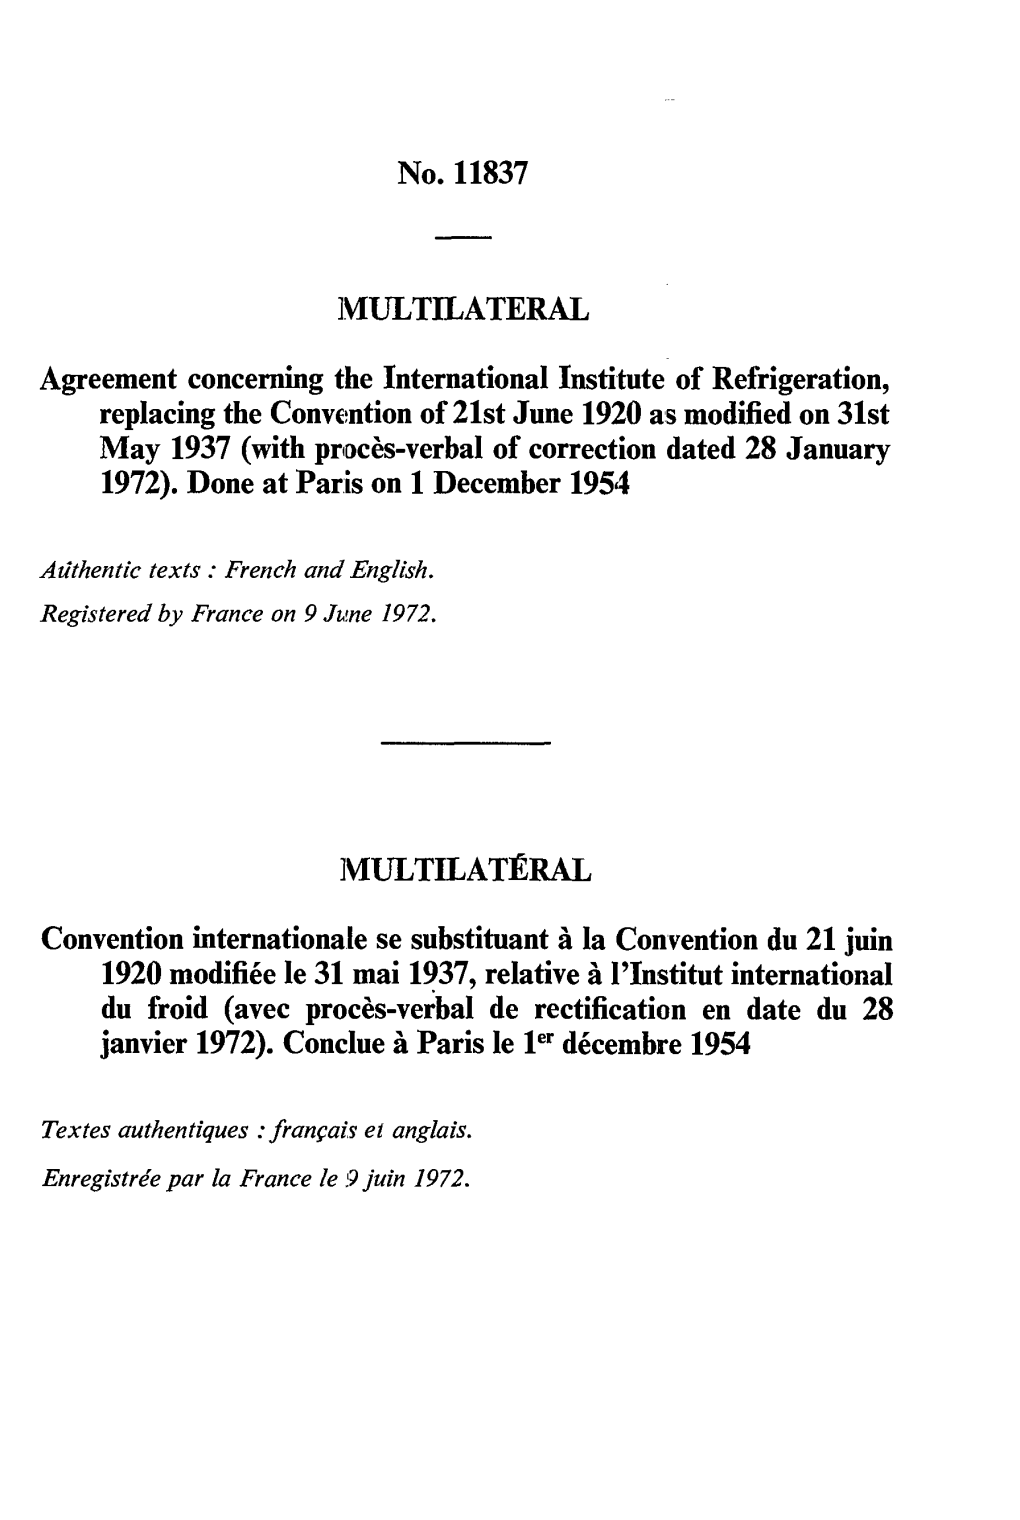 No. 11837 MULTILATERAL Agreement Concerning The